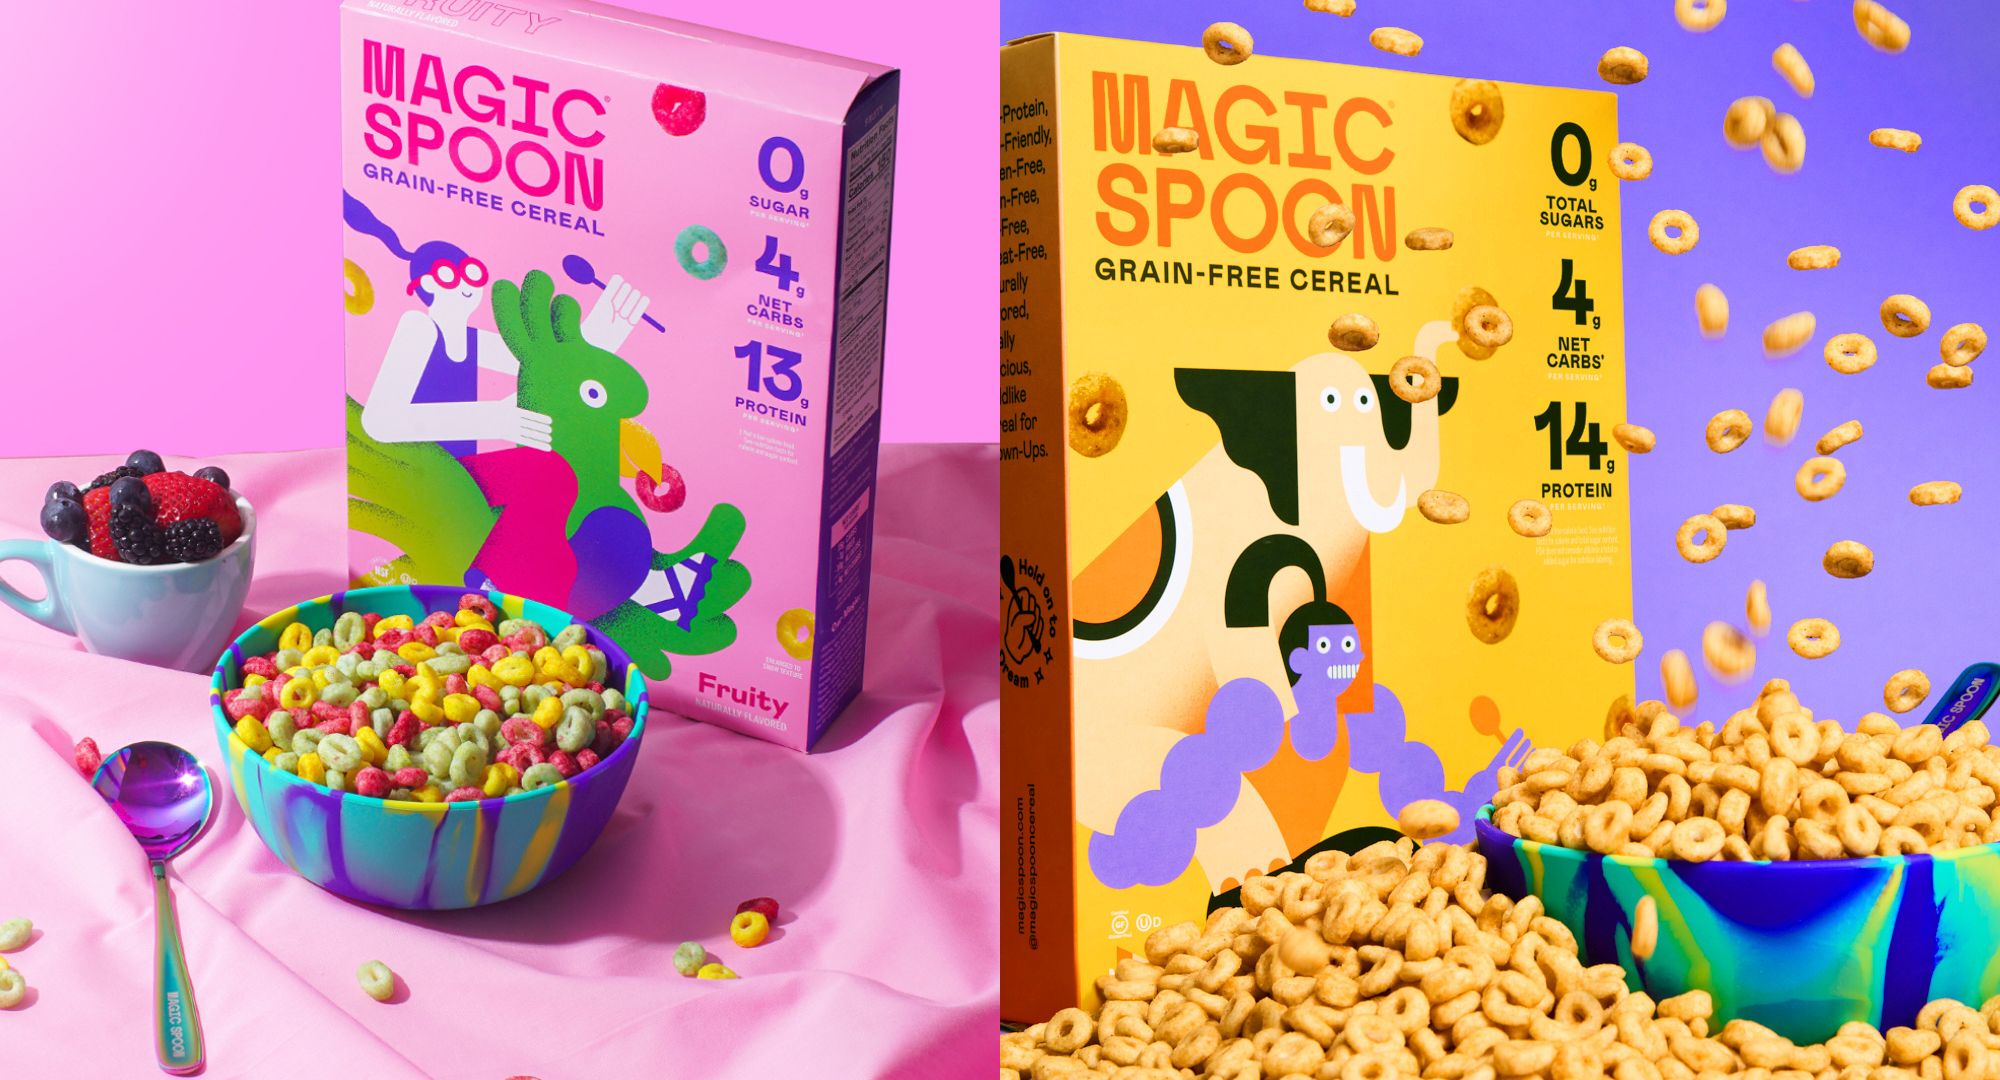 Magic Spoon lifestyle cereal